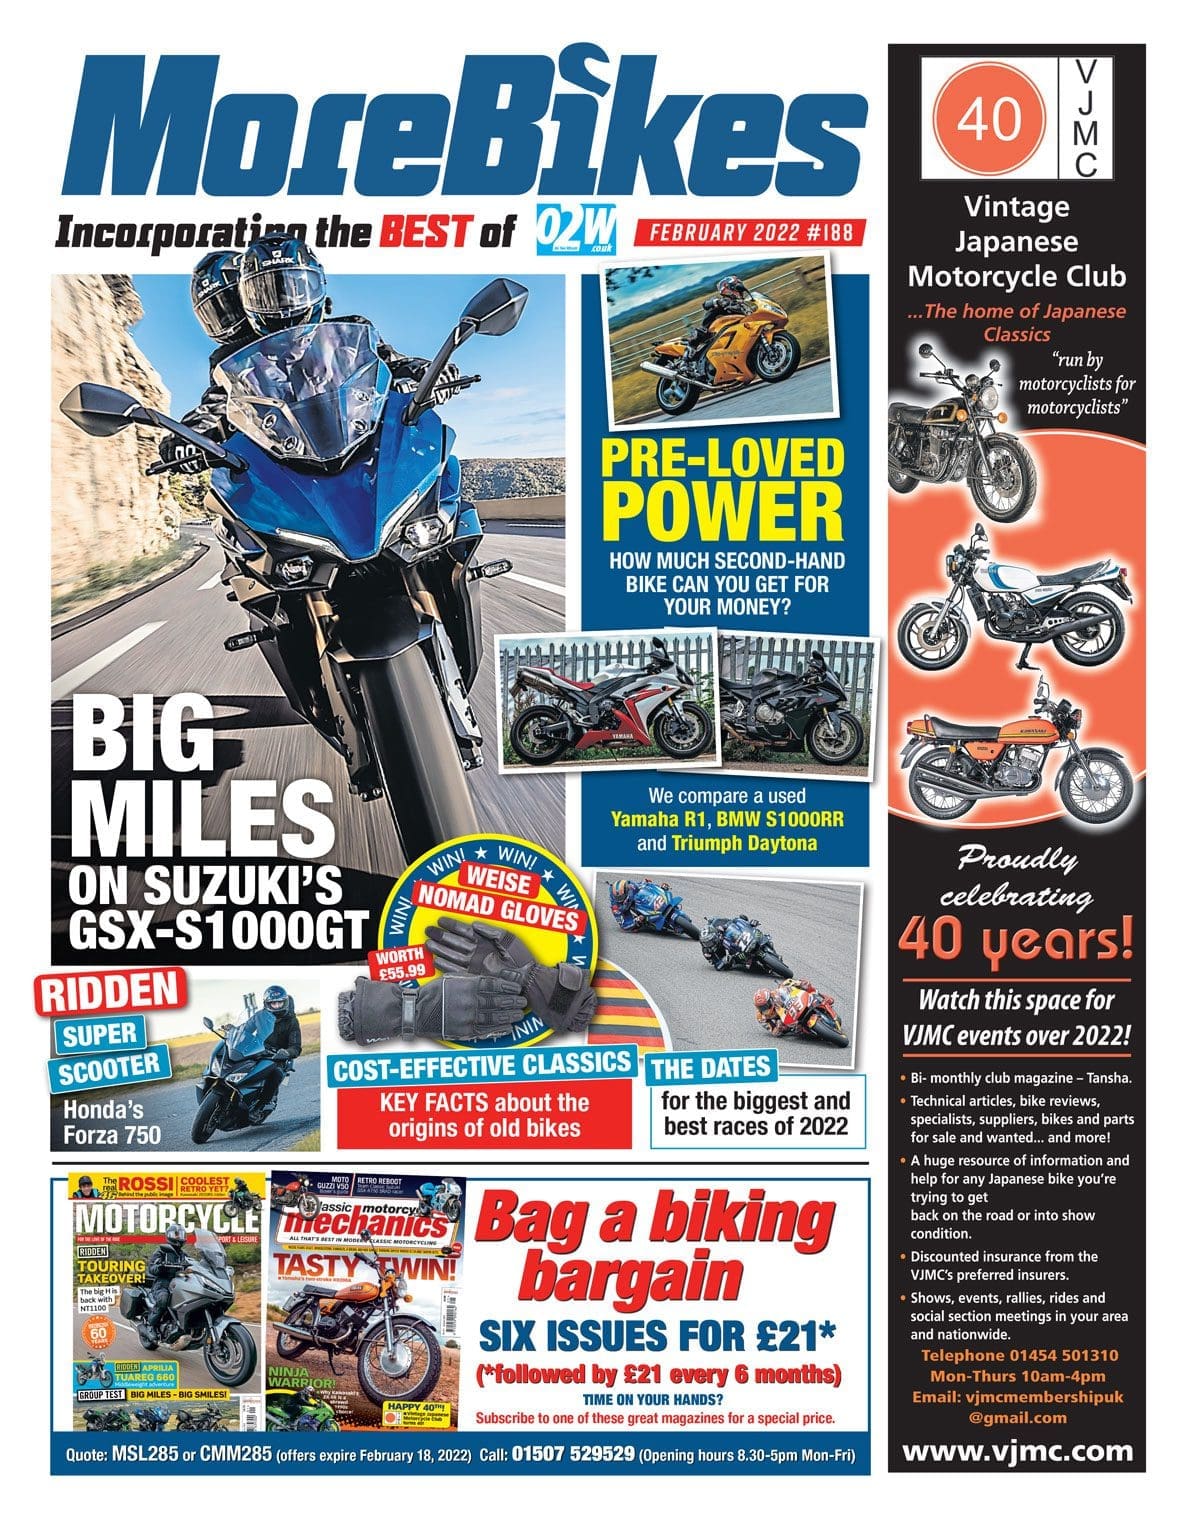 PREVIEW: February issue of MoreBikes newspaper